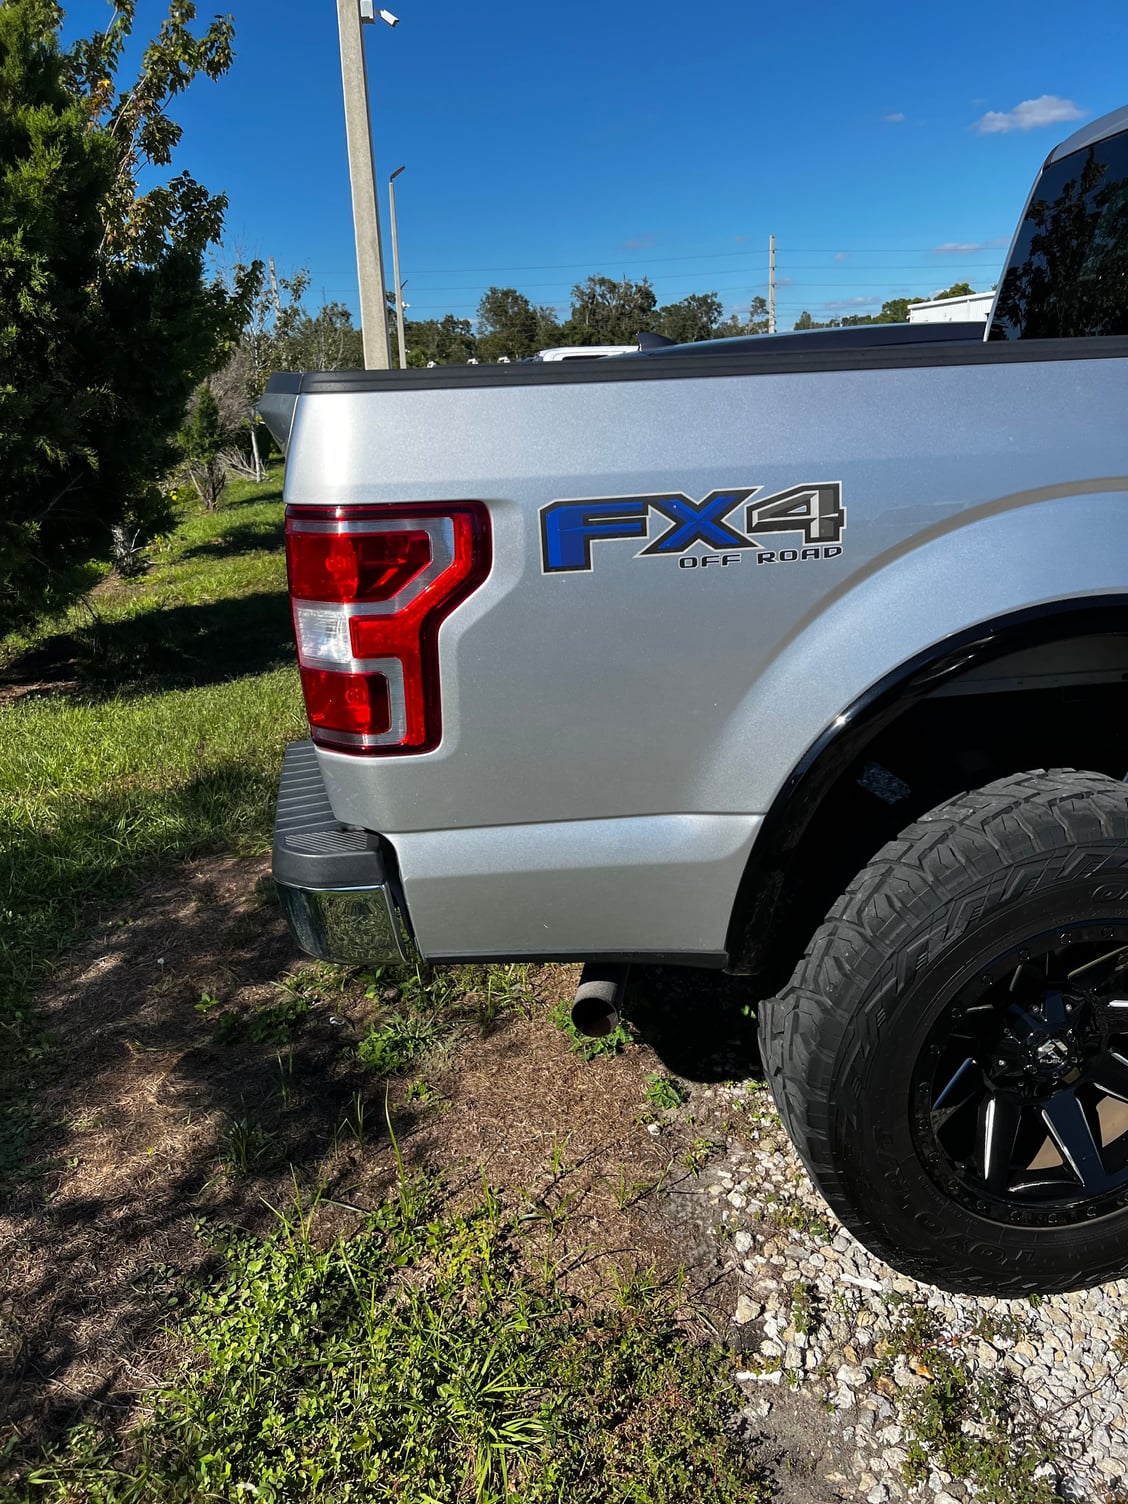 Removed FX4 decals, regret what to replace with? - Page 6